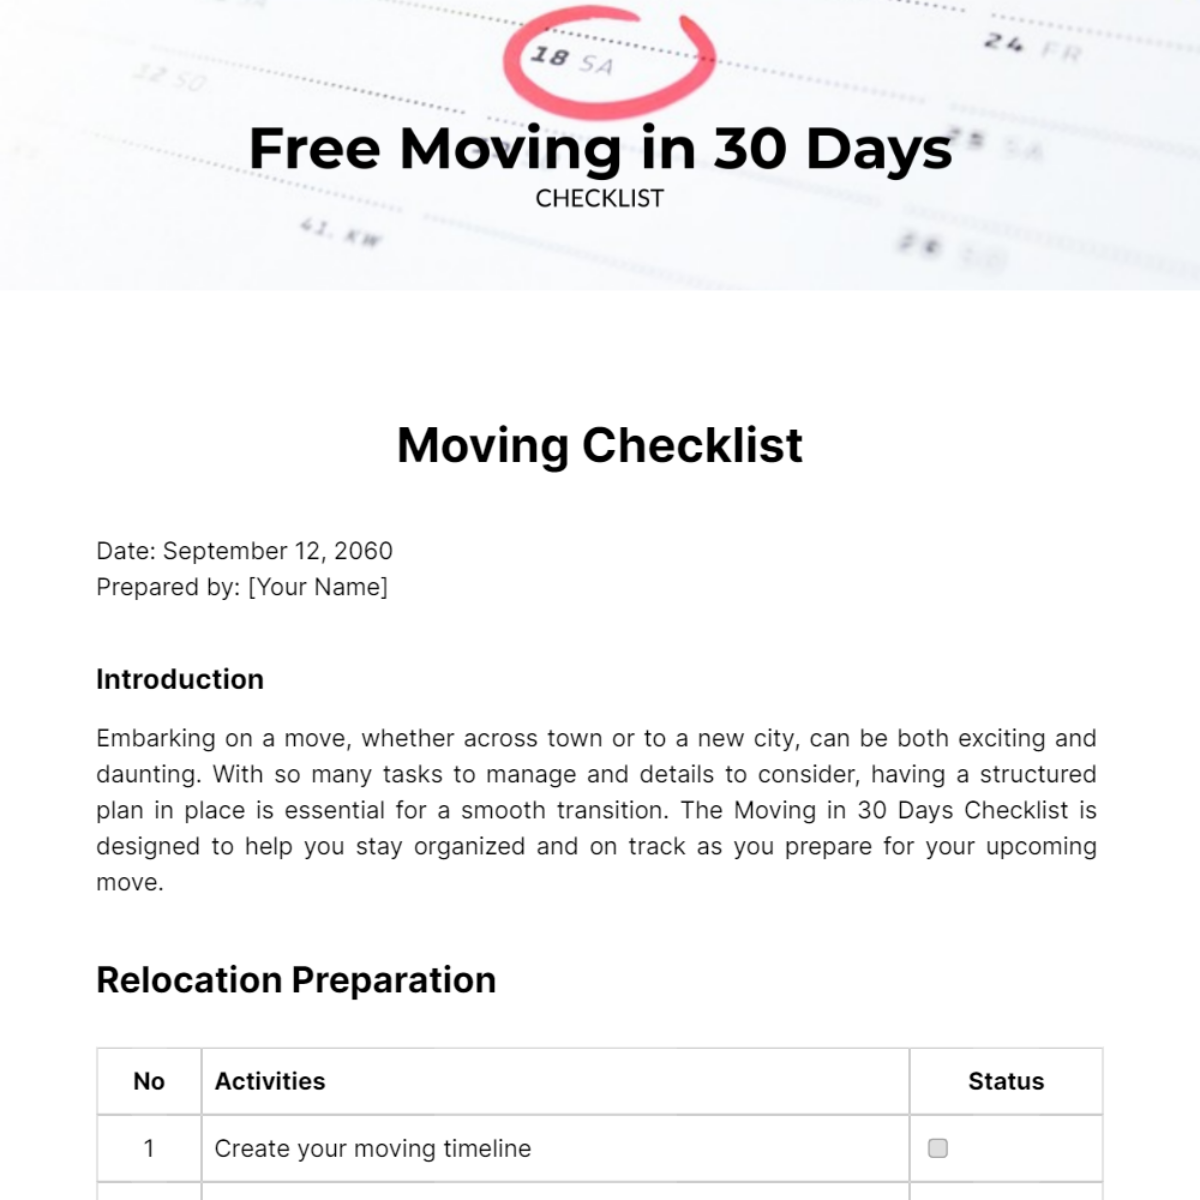 Moving in 30 Days Checklist Template